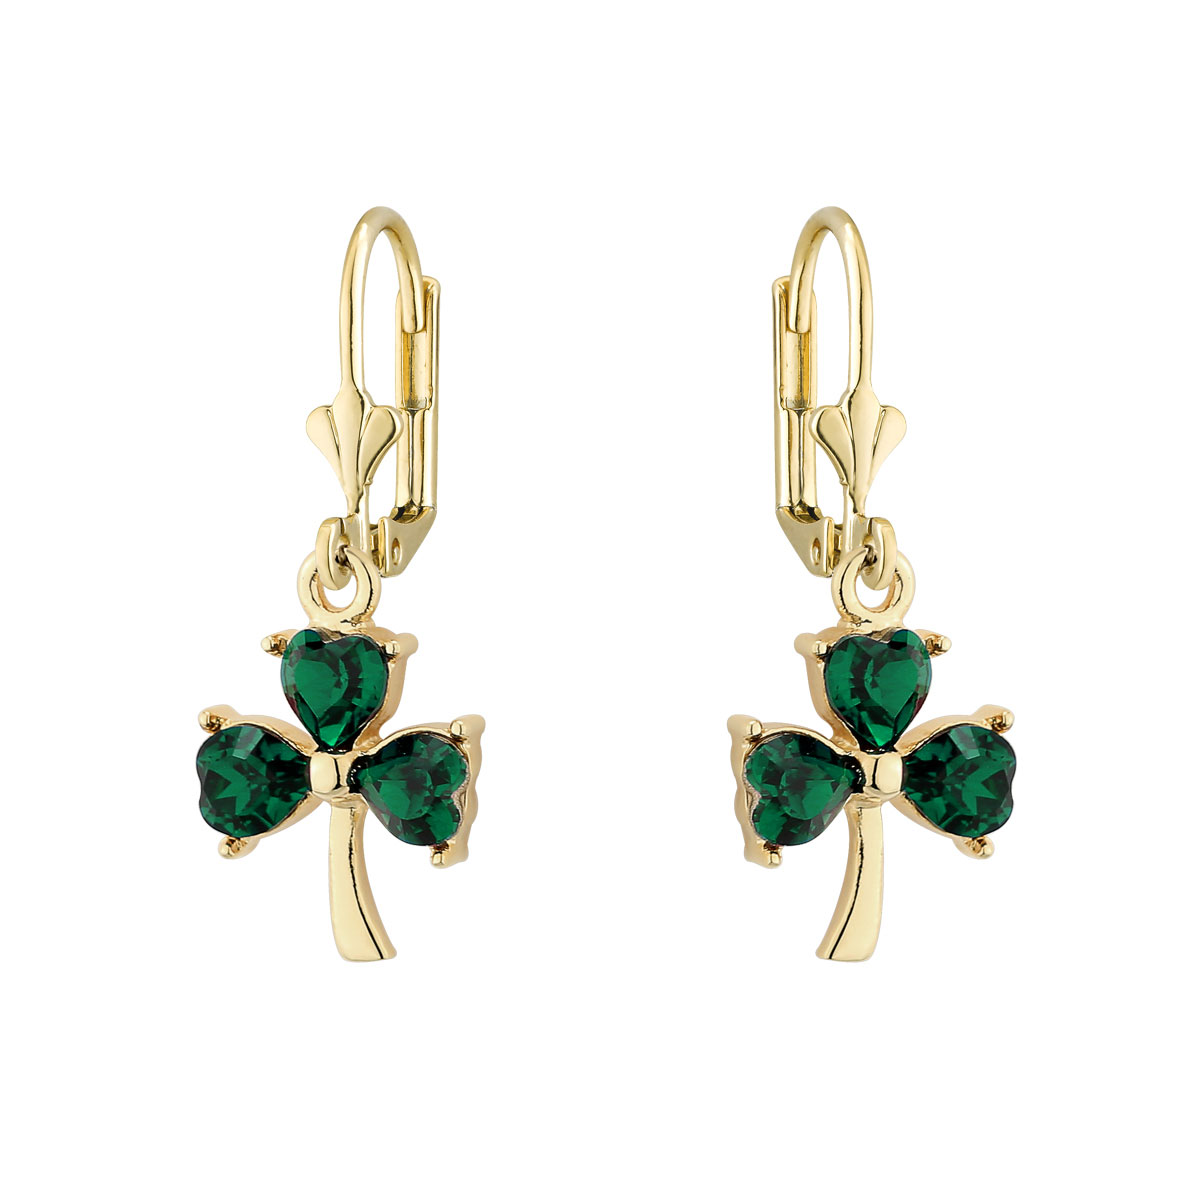 Cashs Ireland Gold Plated Shamrock and Crystal Drop Earrings